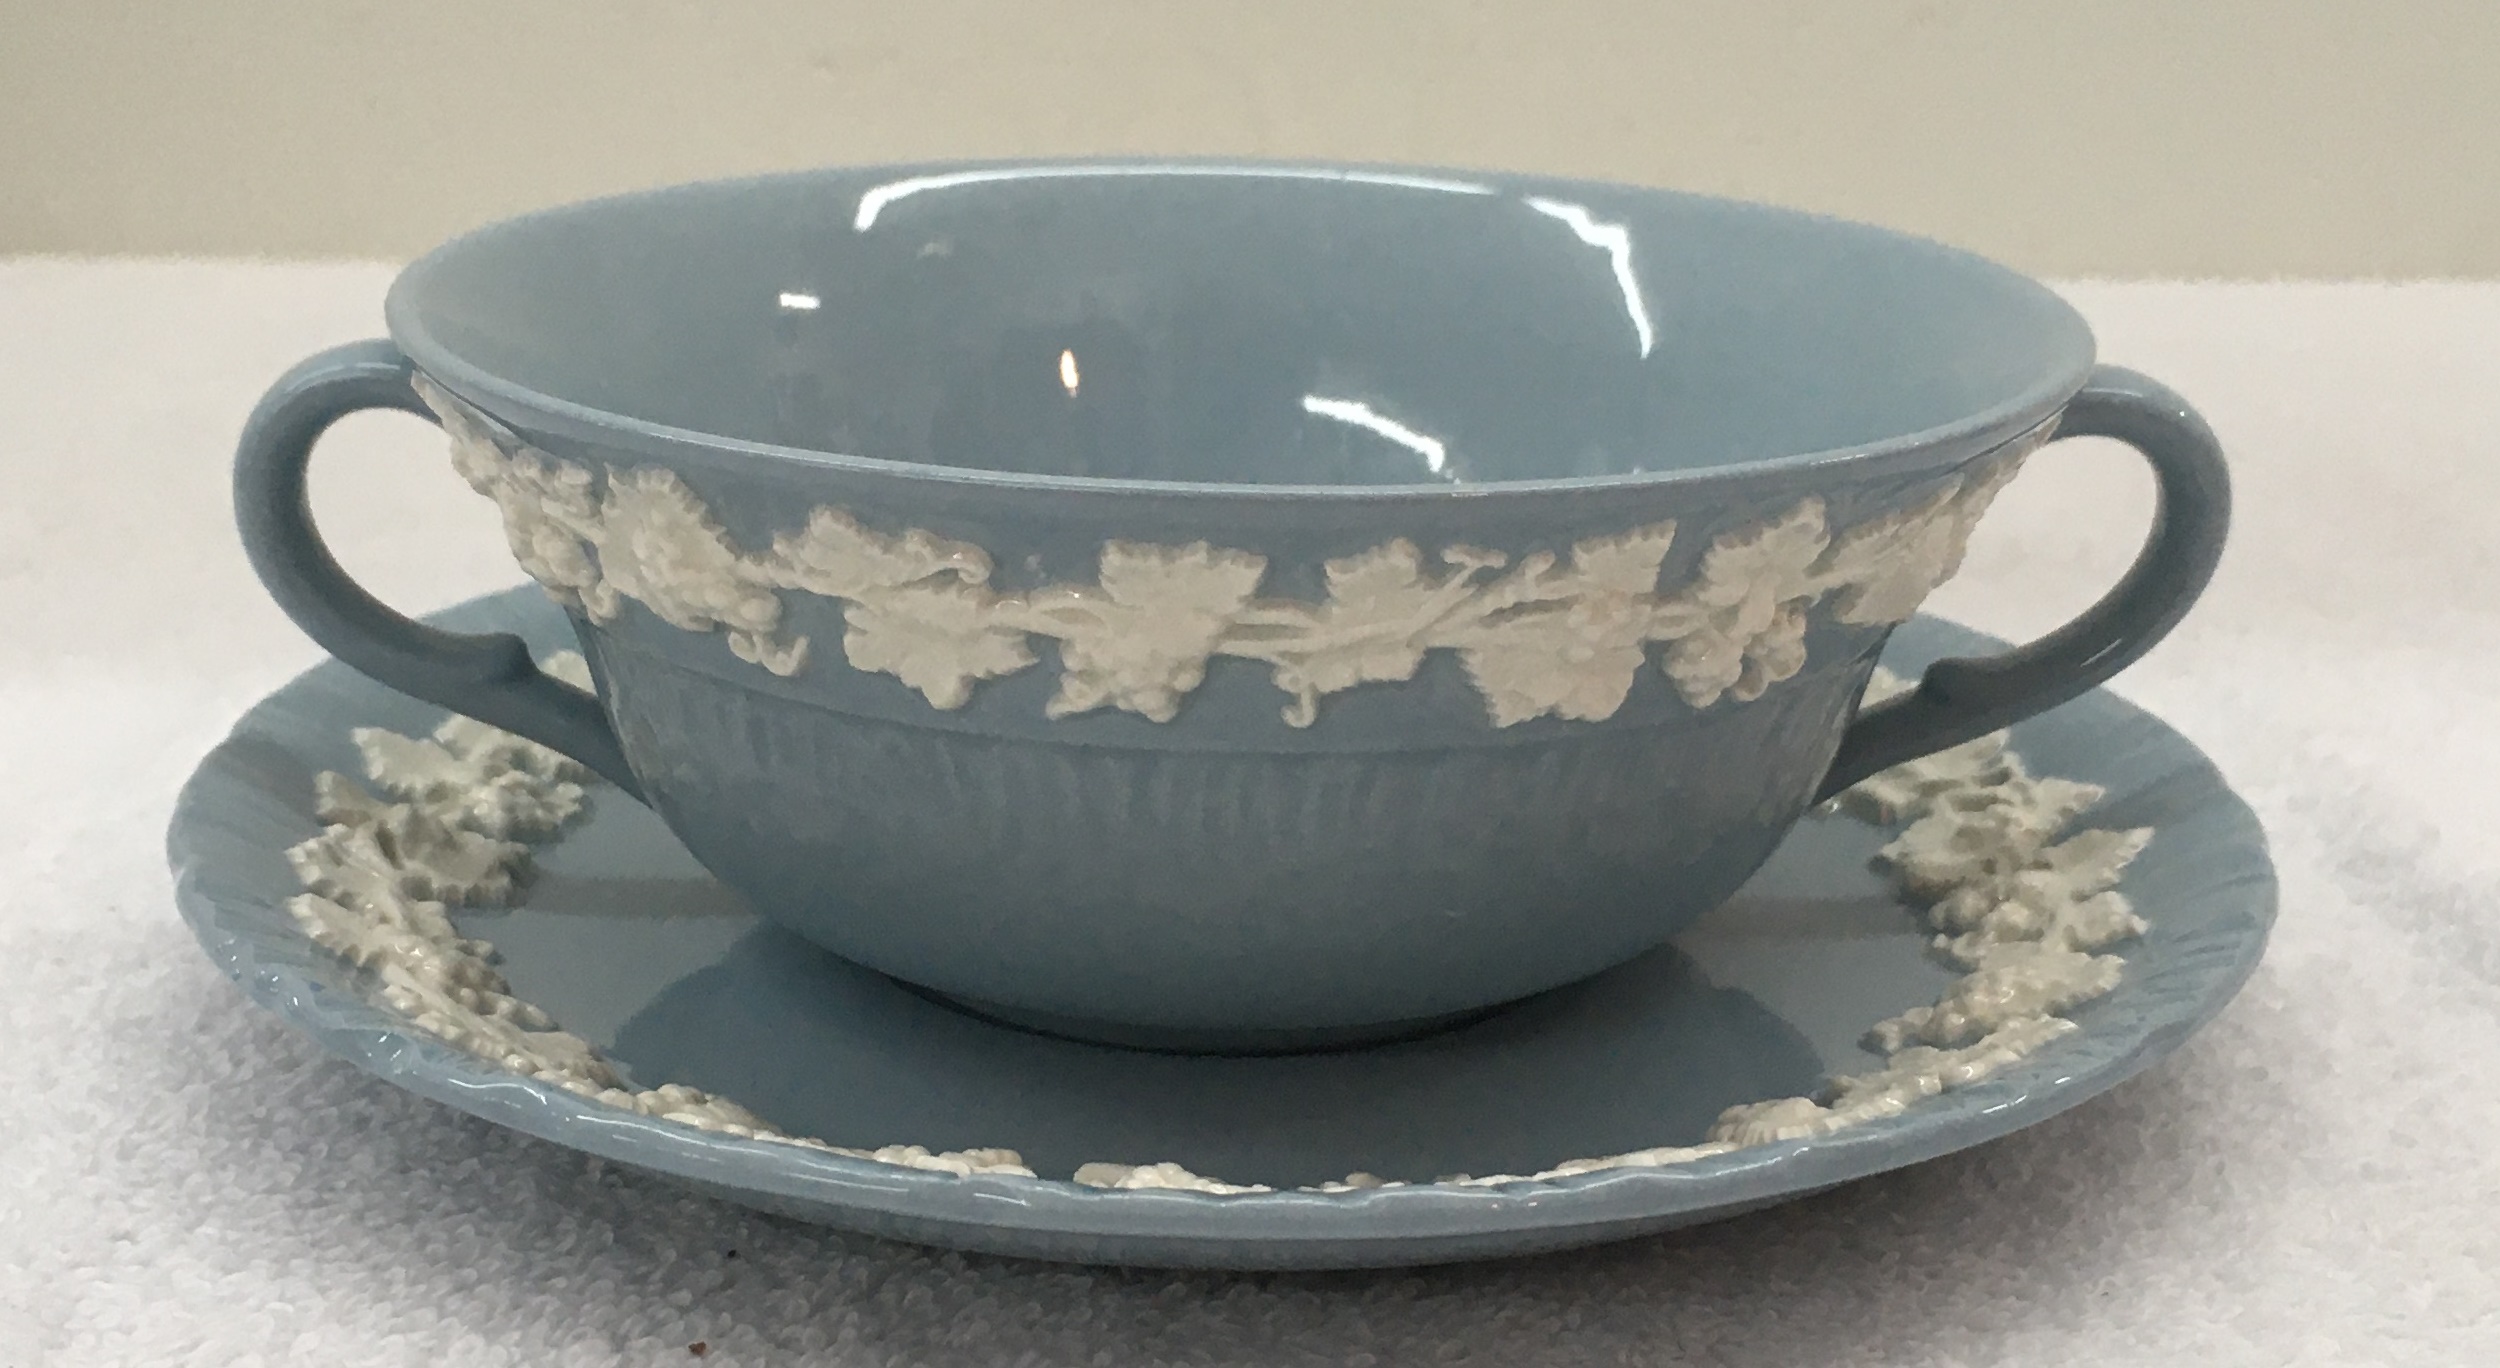 SHELL EDGE Wedgwood China CREAM ON LAVENDER Rim Soup Bowl EXCELLENT 